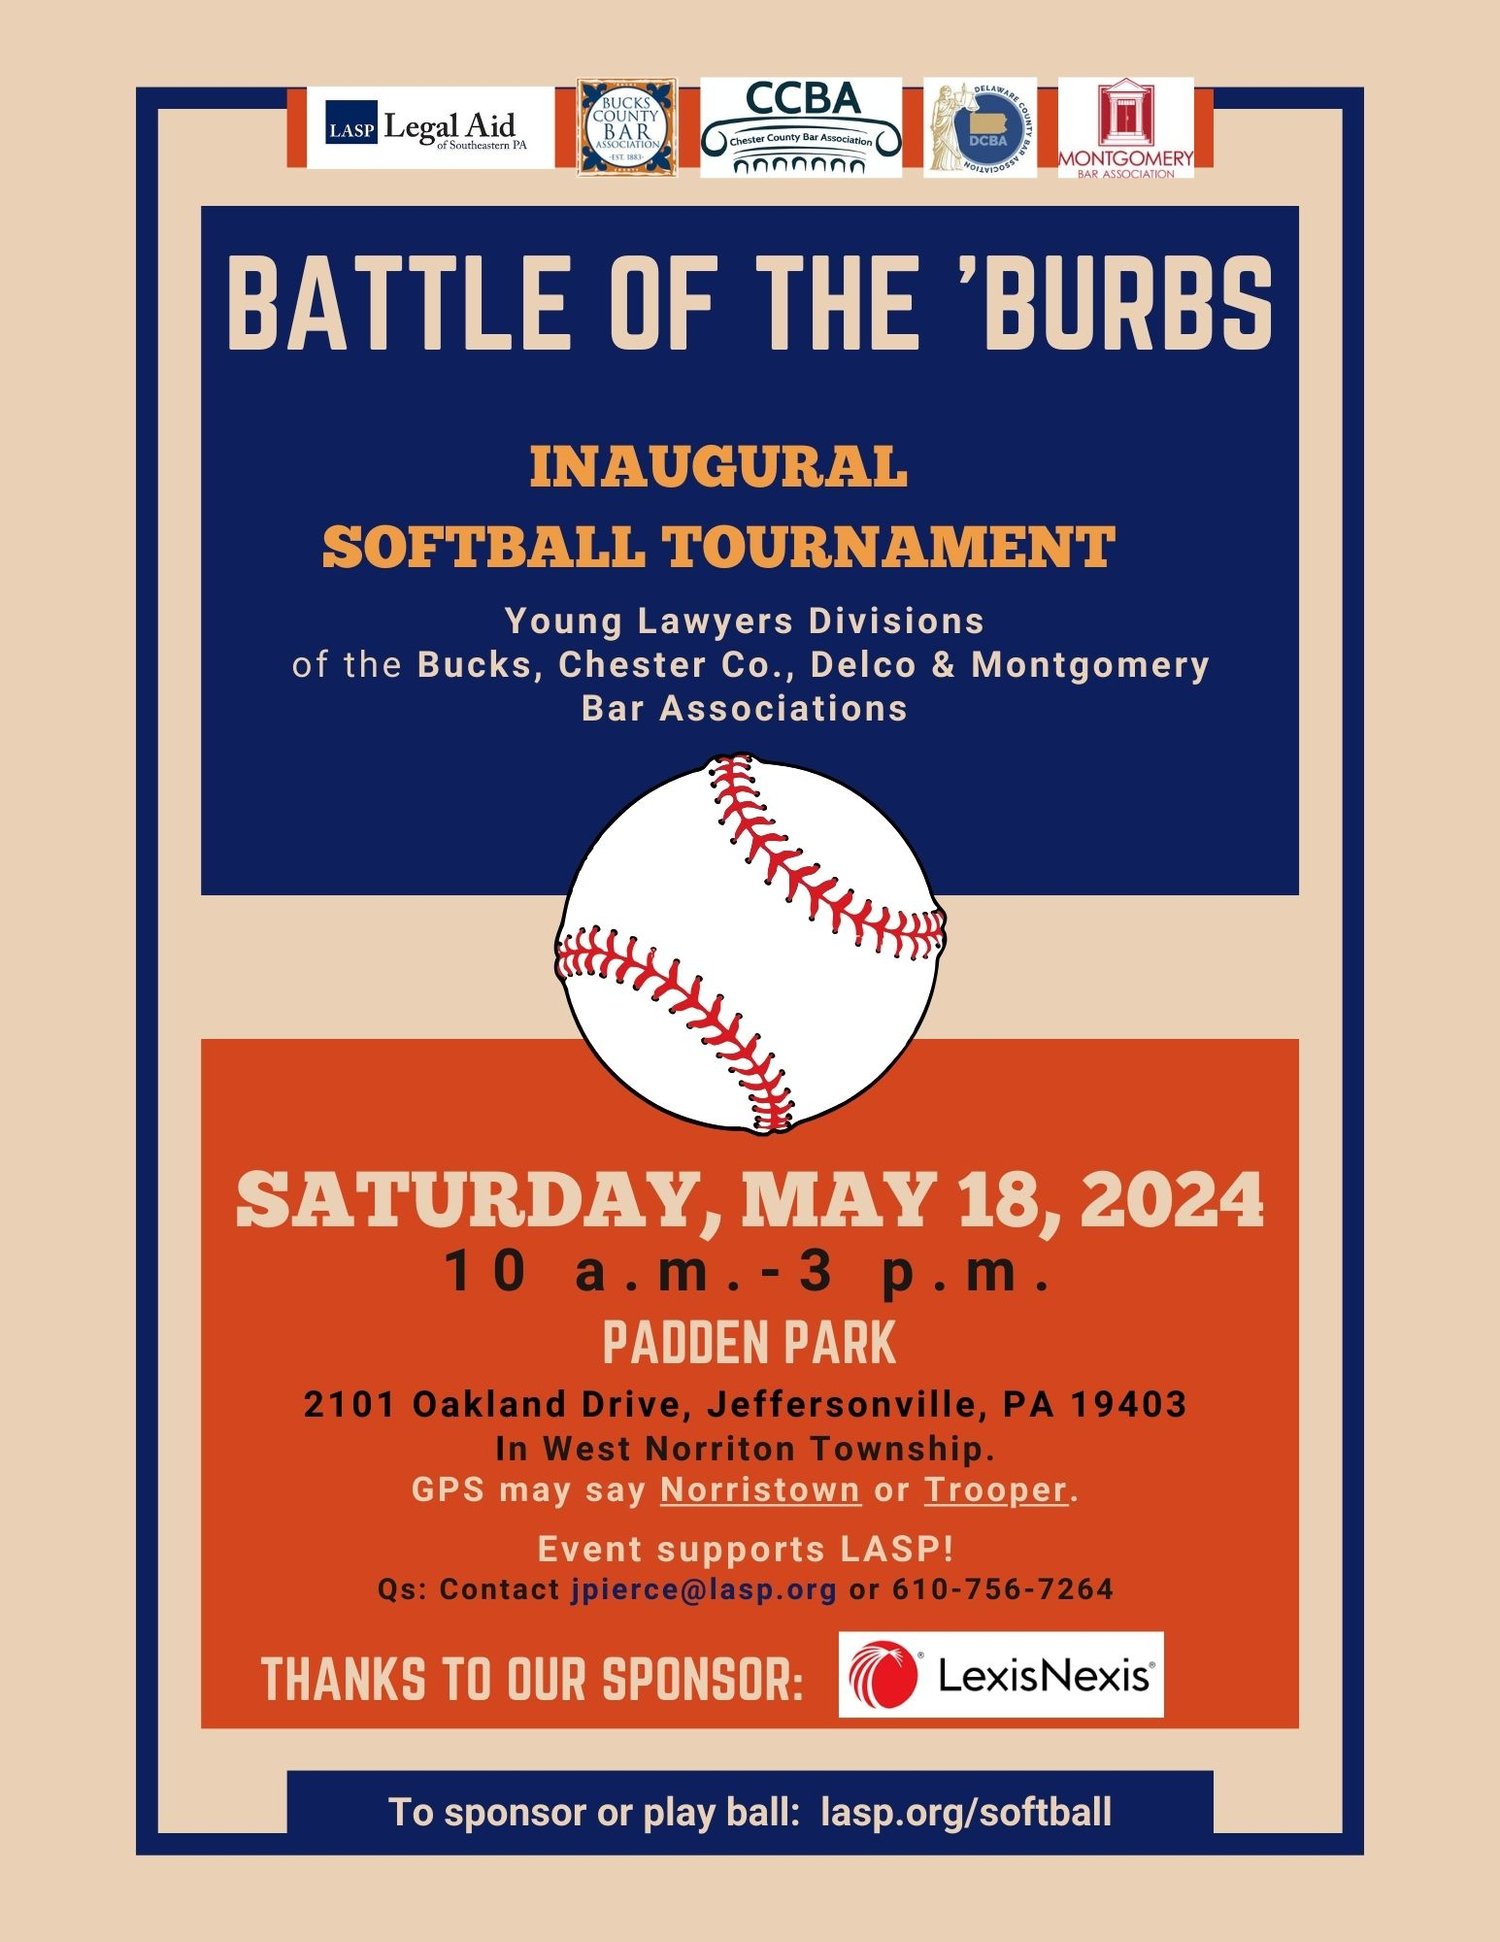 Battle of the Burbs flyer graphic